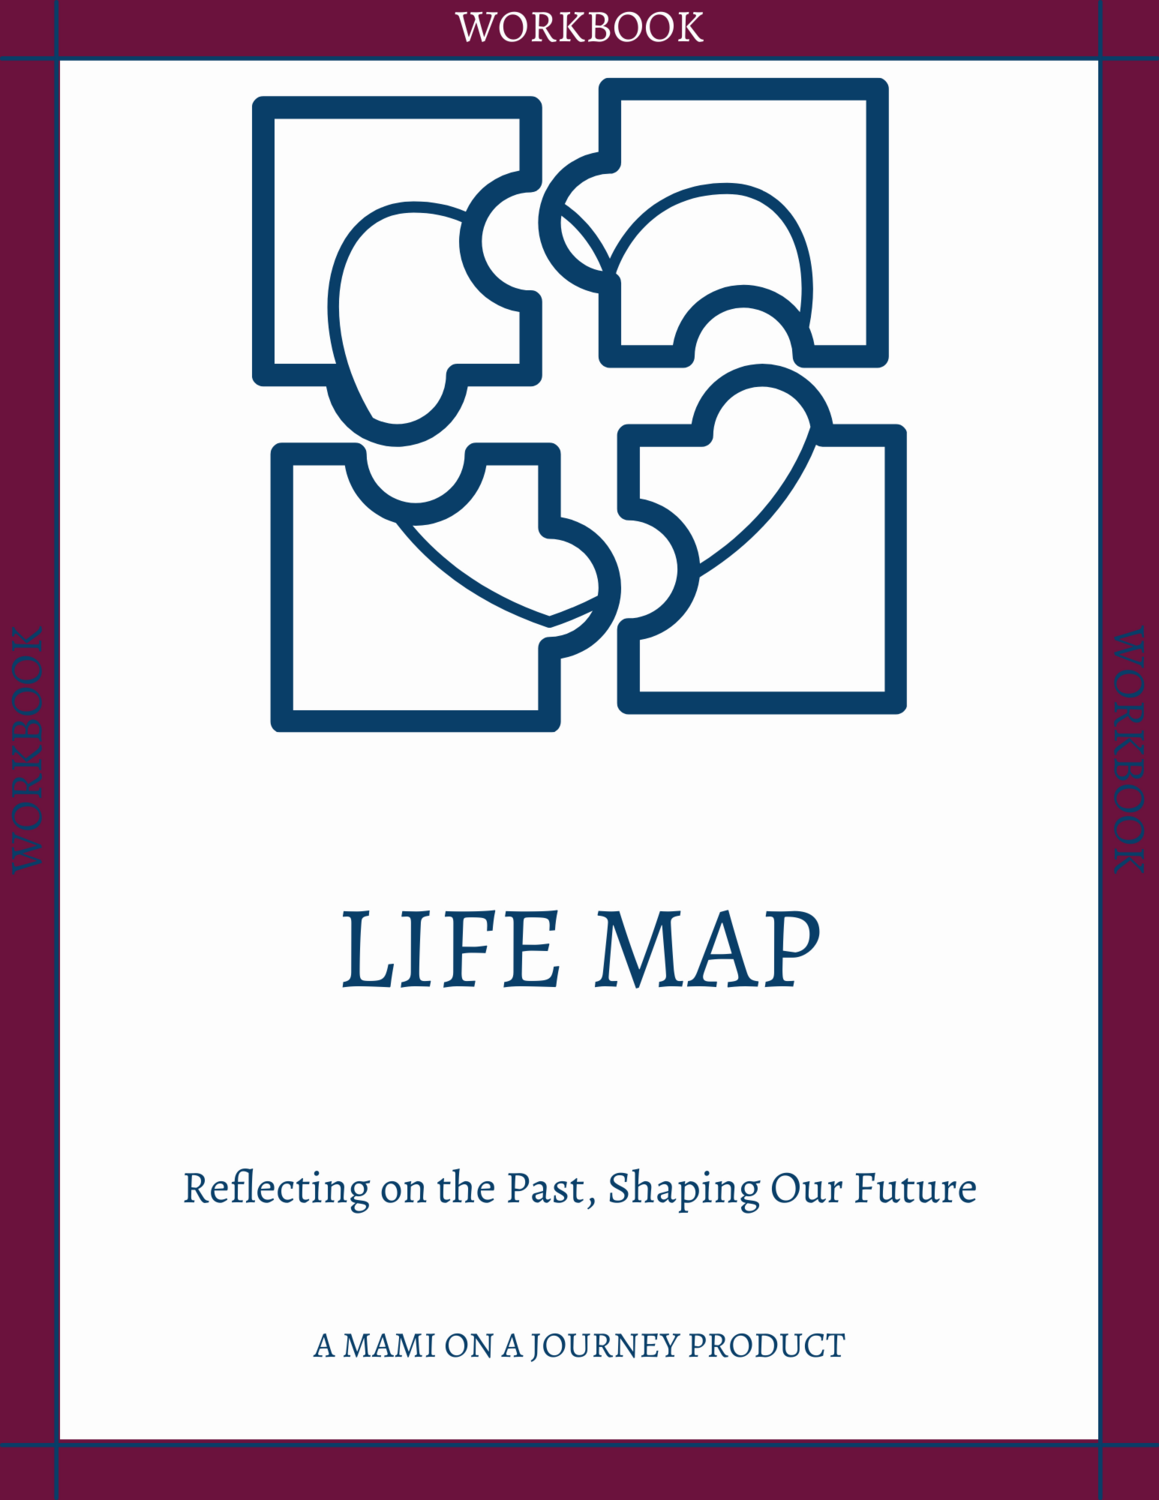 LifeMap Together: Your Journey to Love and Growth